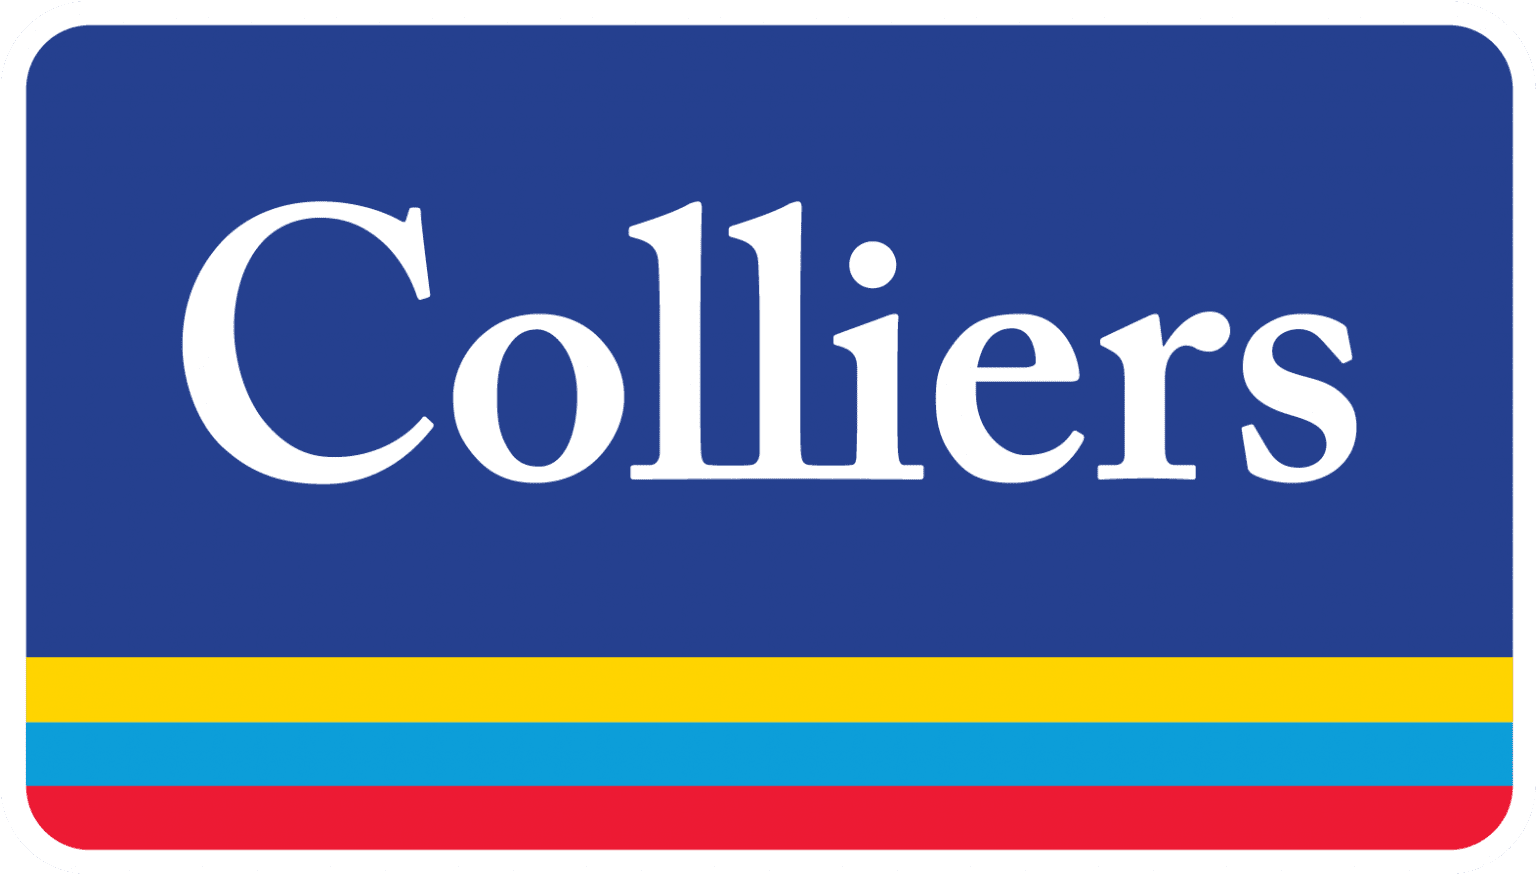 Colliers_WebUseOnAllBackgrounds-1536x875.png